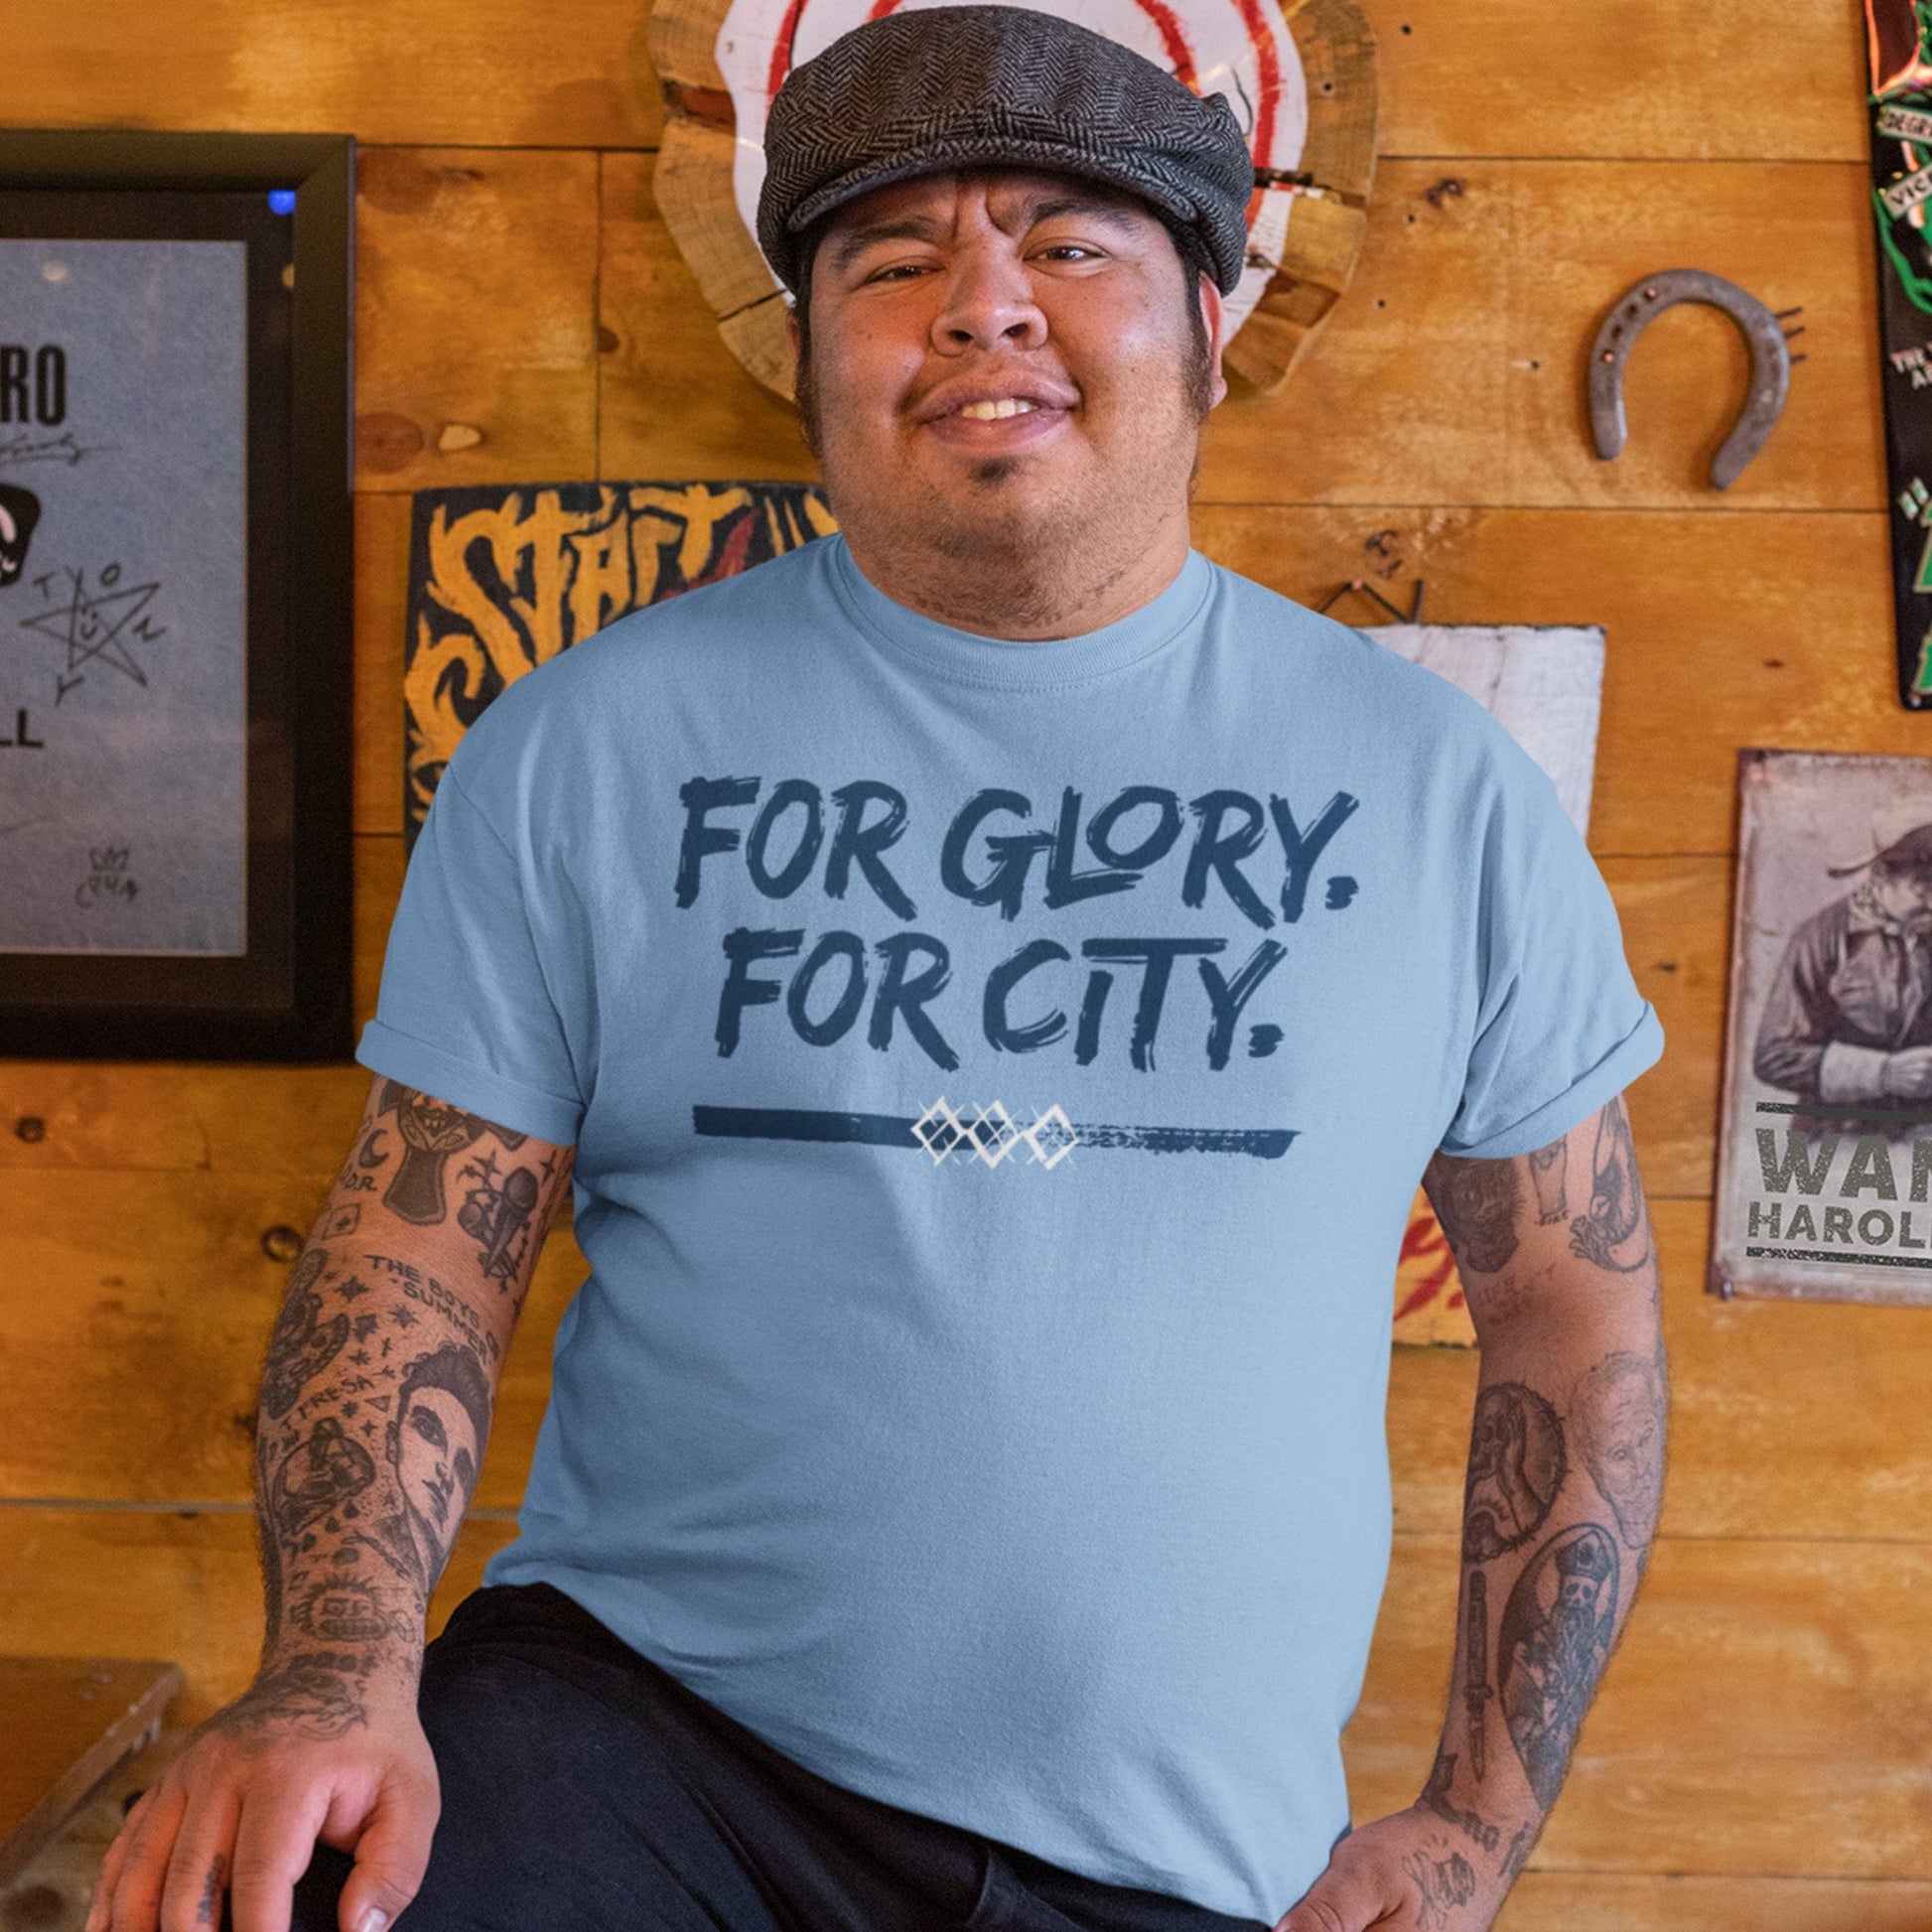 KC Swag Sporting Kansas City navy, powder, white FOR GLORY FOR CITY on baby blue unisex t-shirt  worn by male model standing against wood wall inside bar